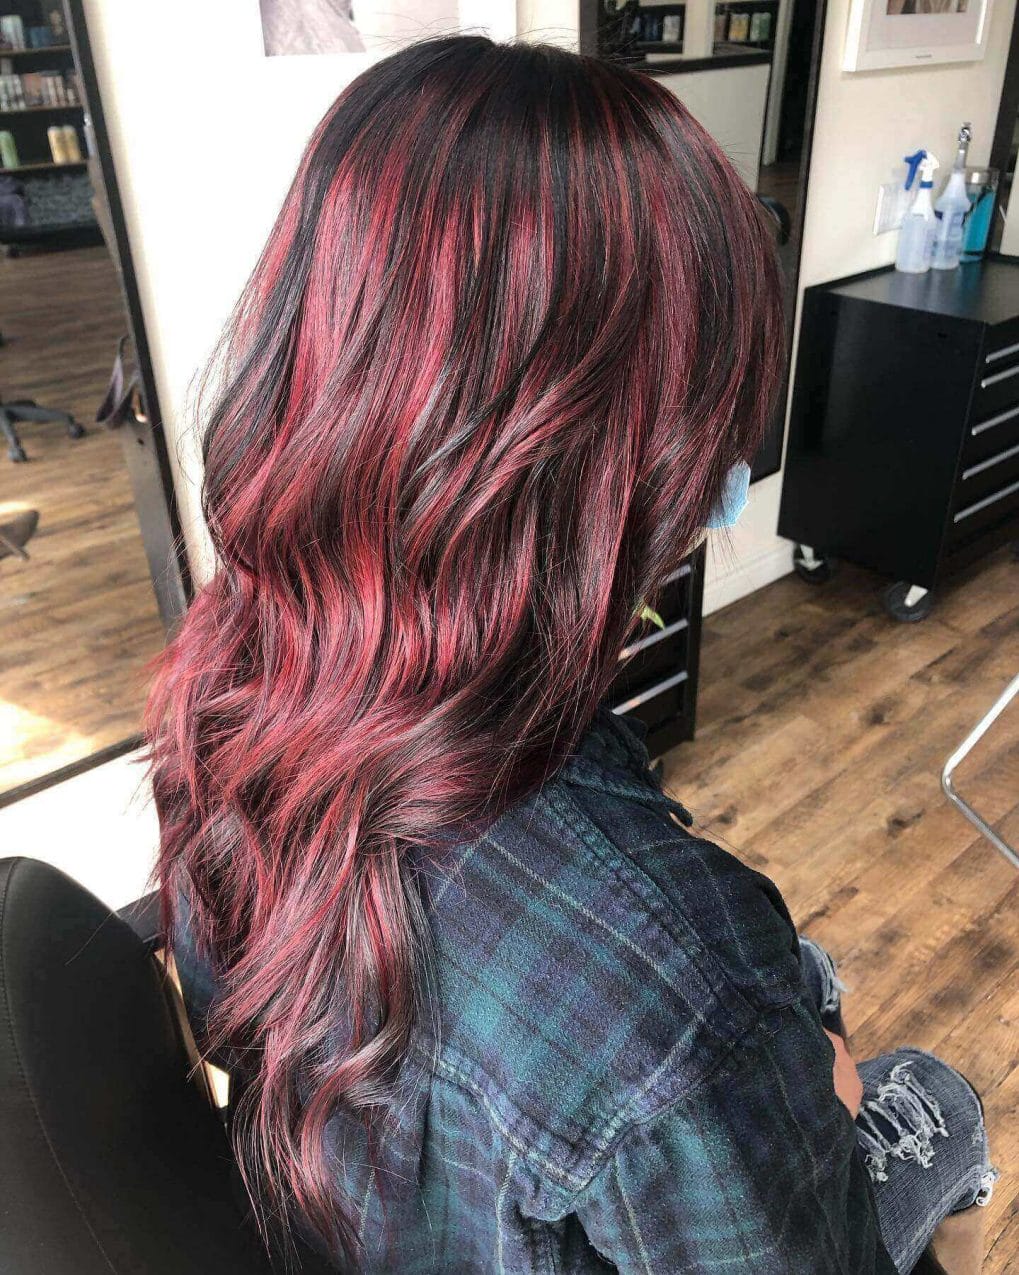 Red and brunette balayage in flowing, elegant long layers.